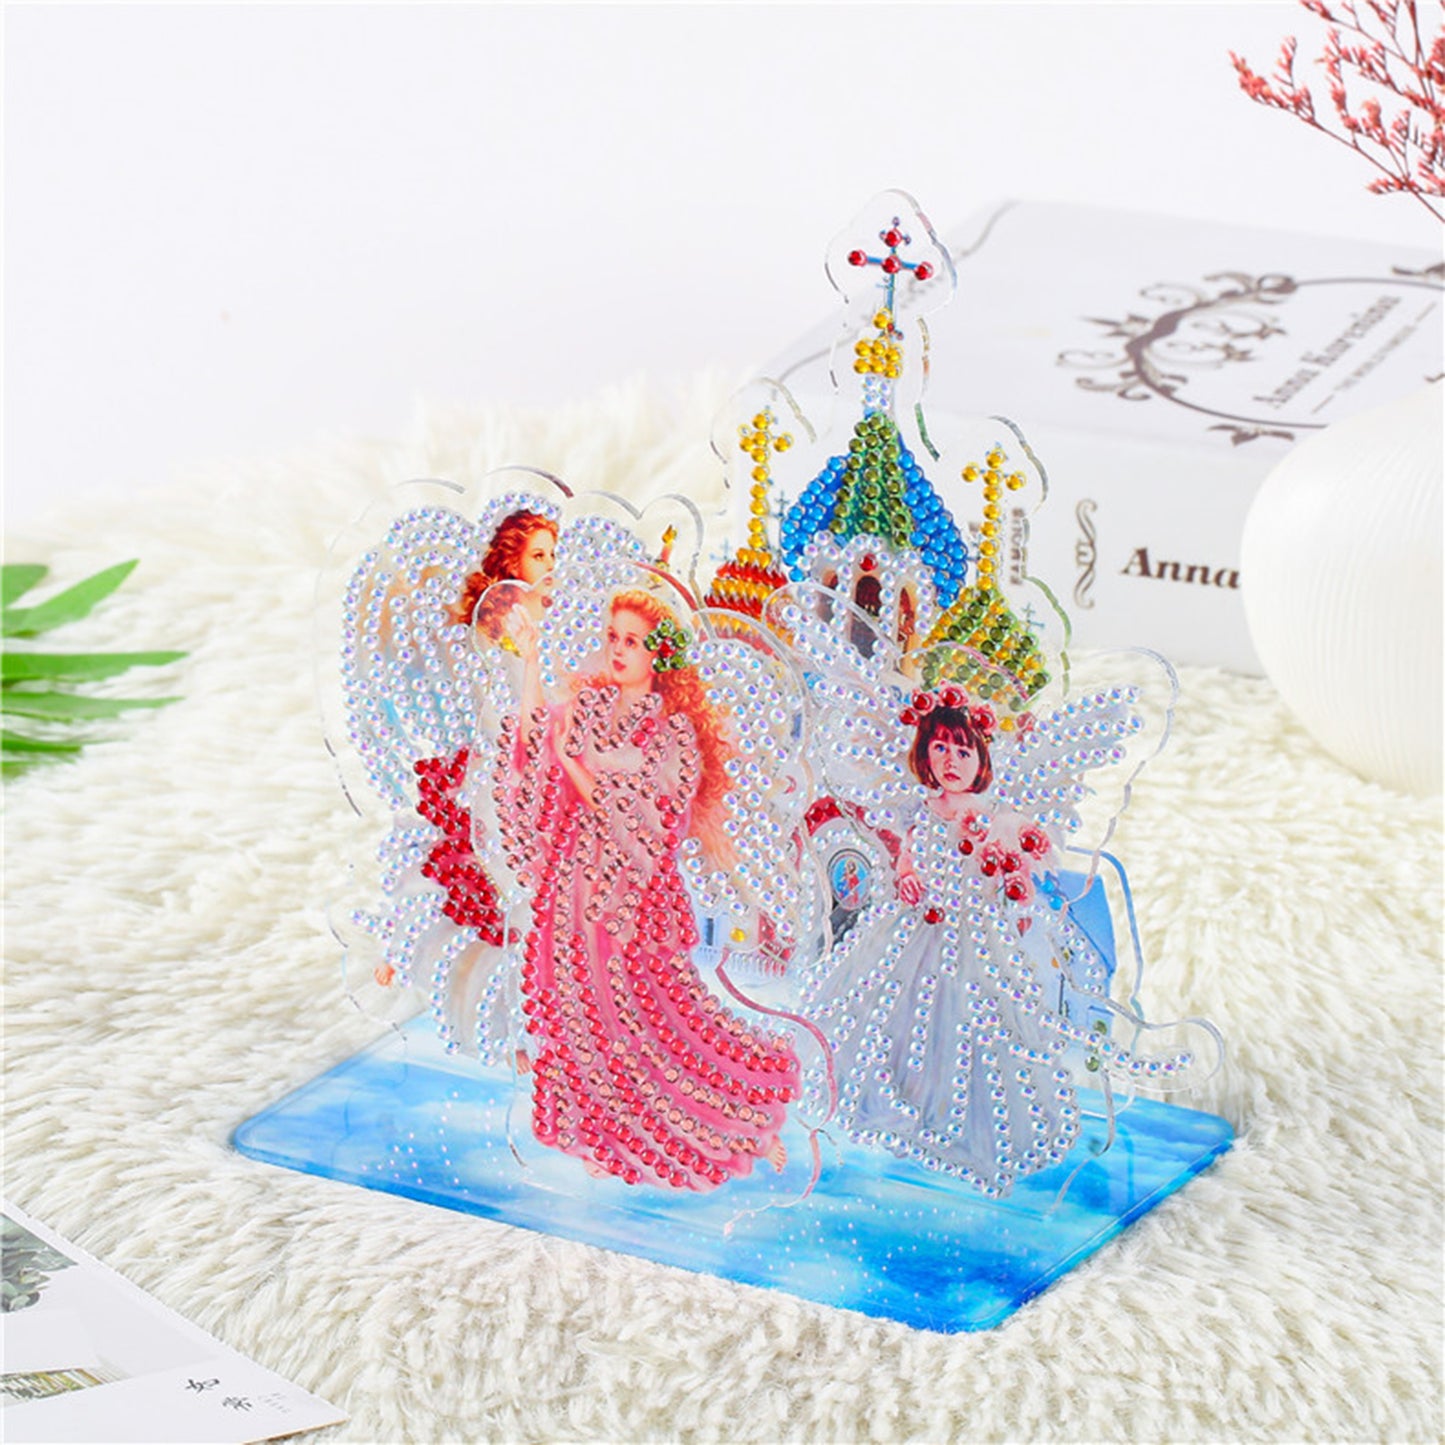 5D Diamond Painting Kits for Children Adult Beginners Table Decor Paint By Number DIY Crafts